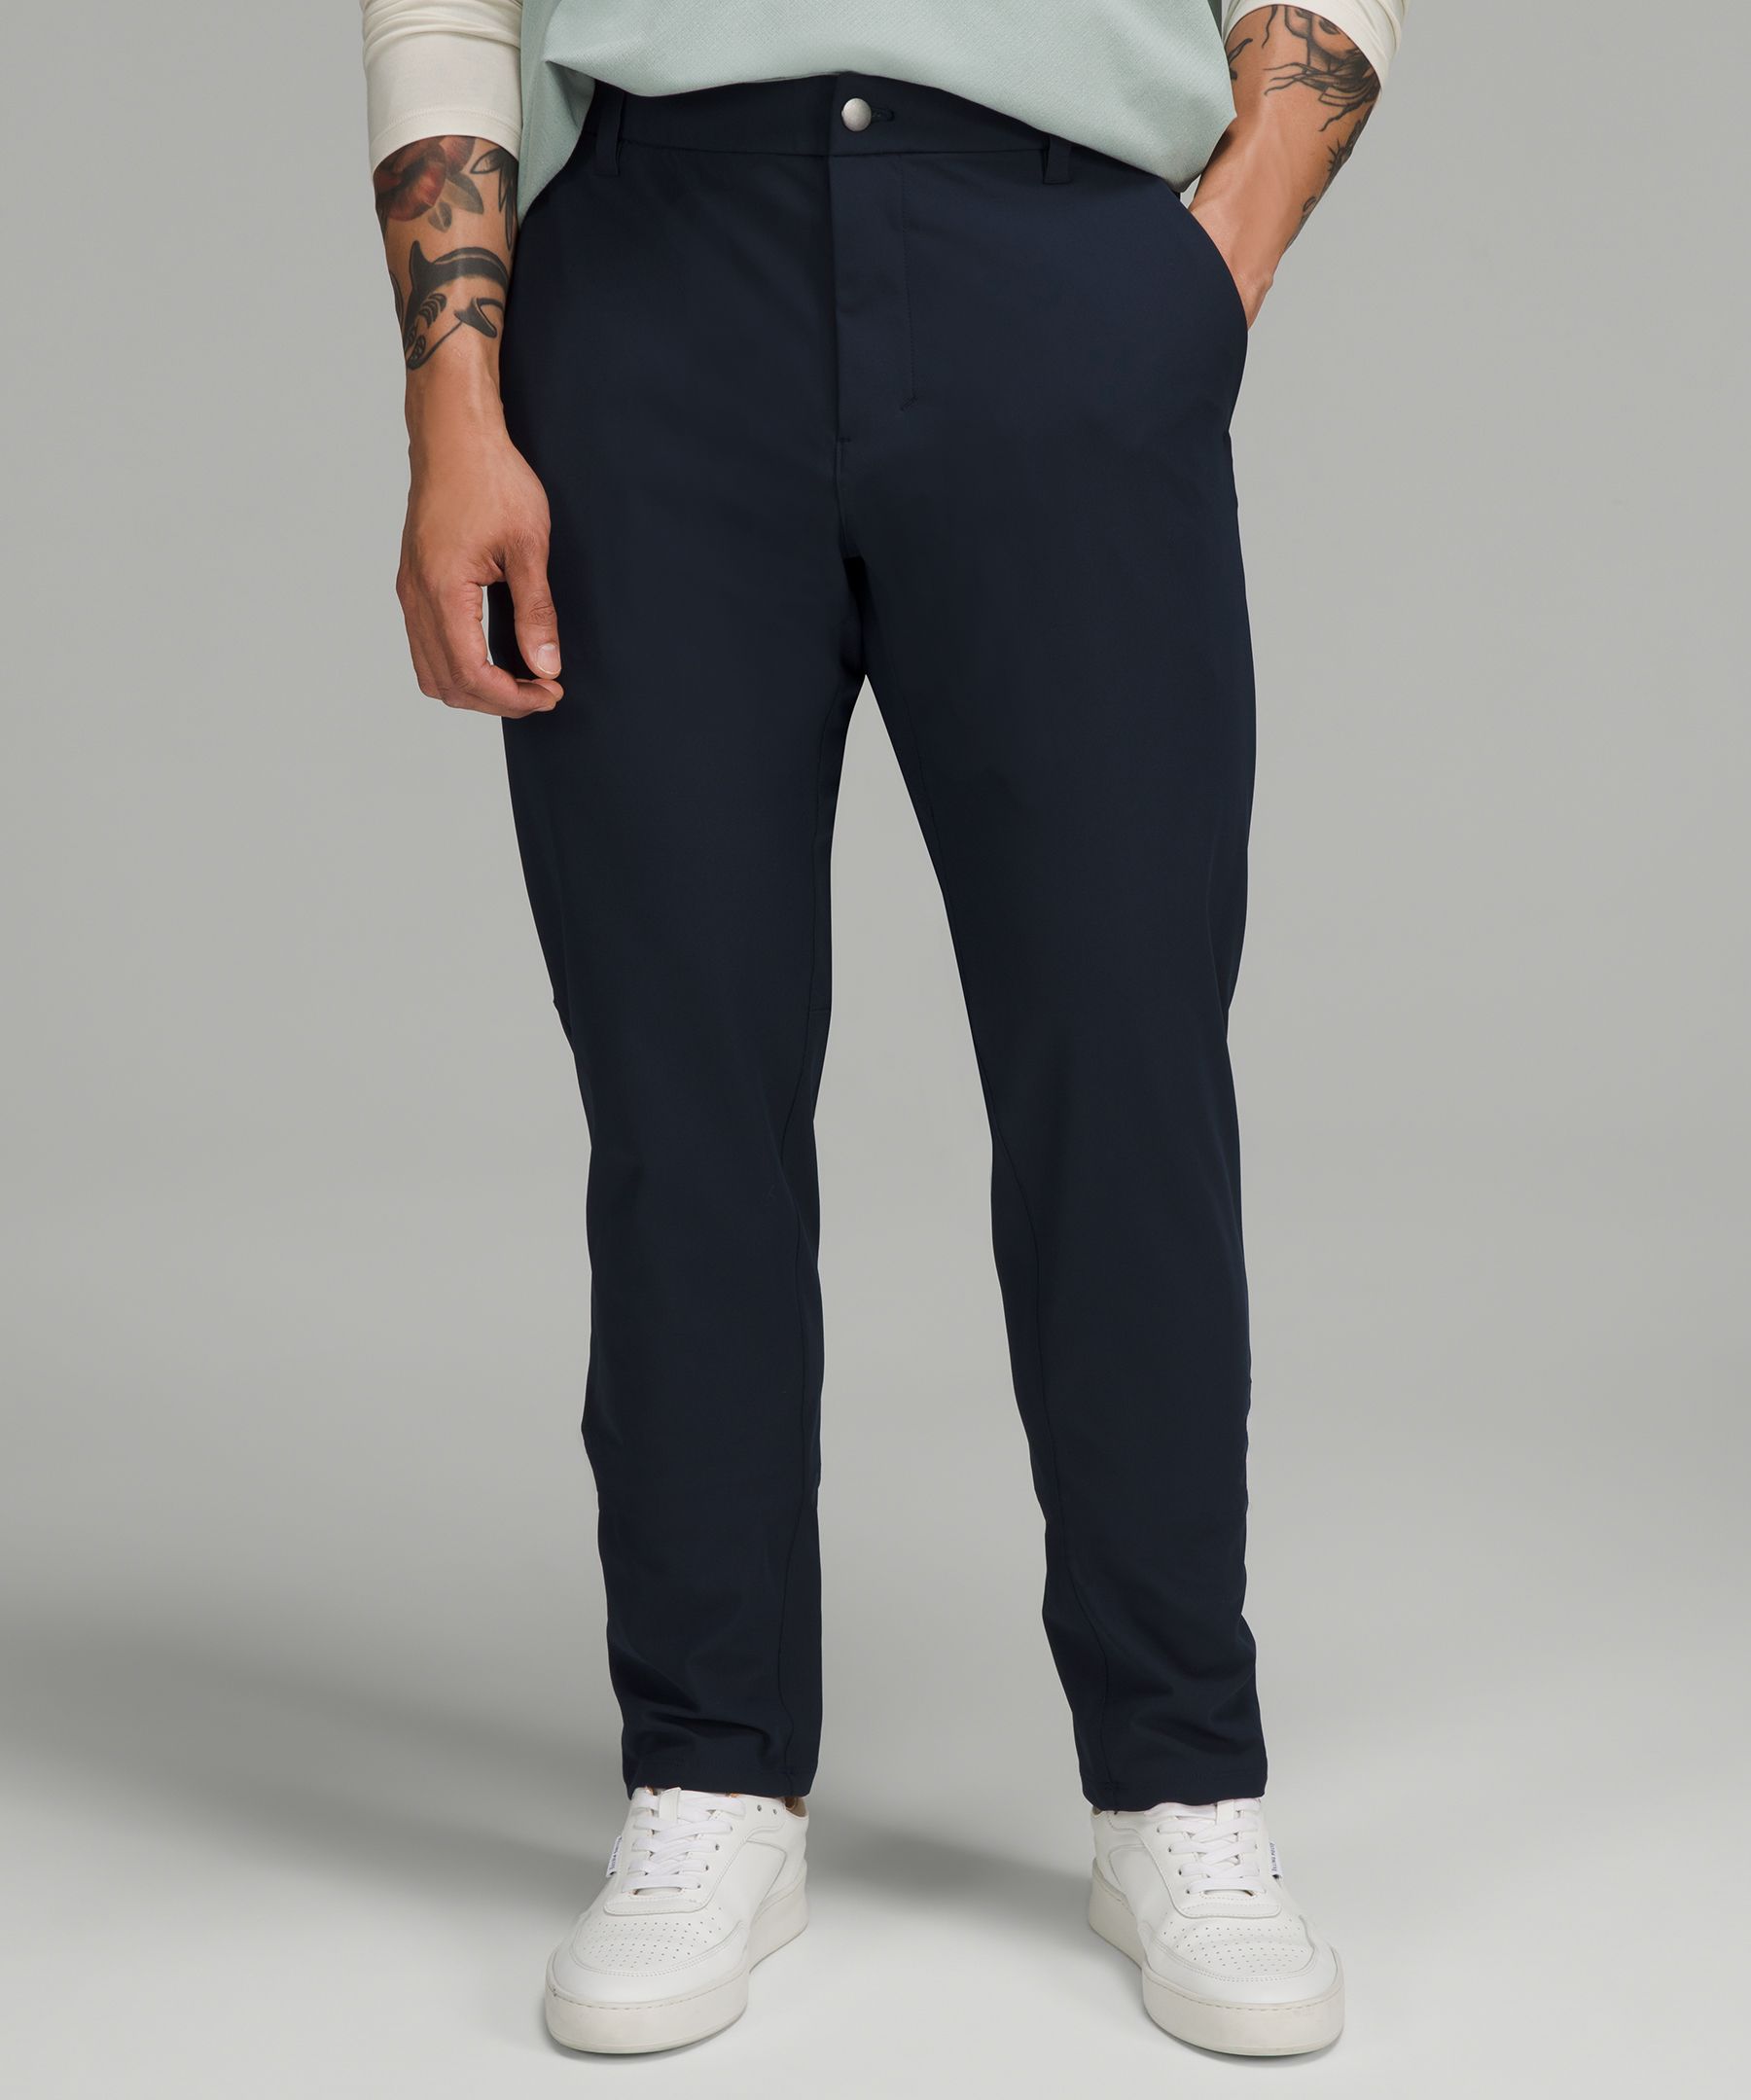 Lululemon Commission Pant Relaxed 34" *warpstreme Online Only